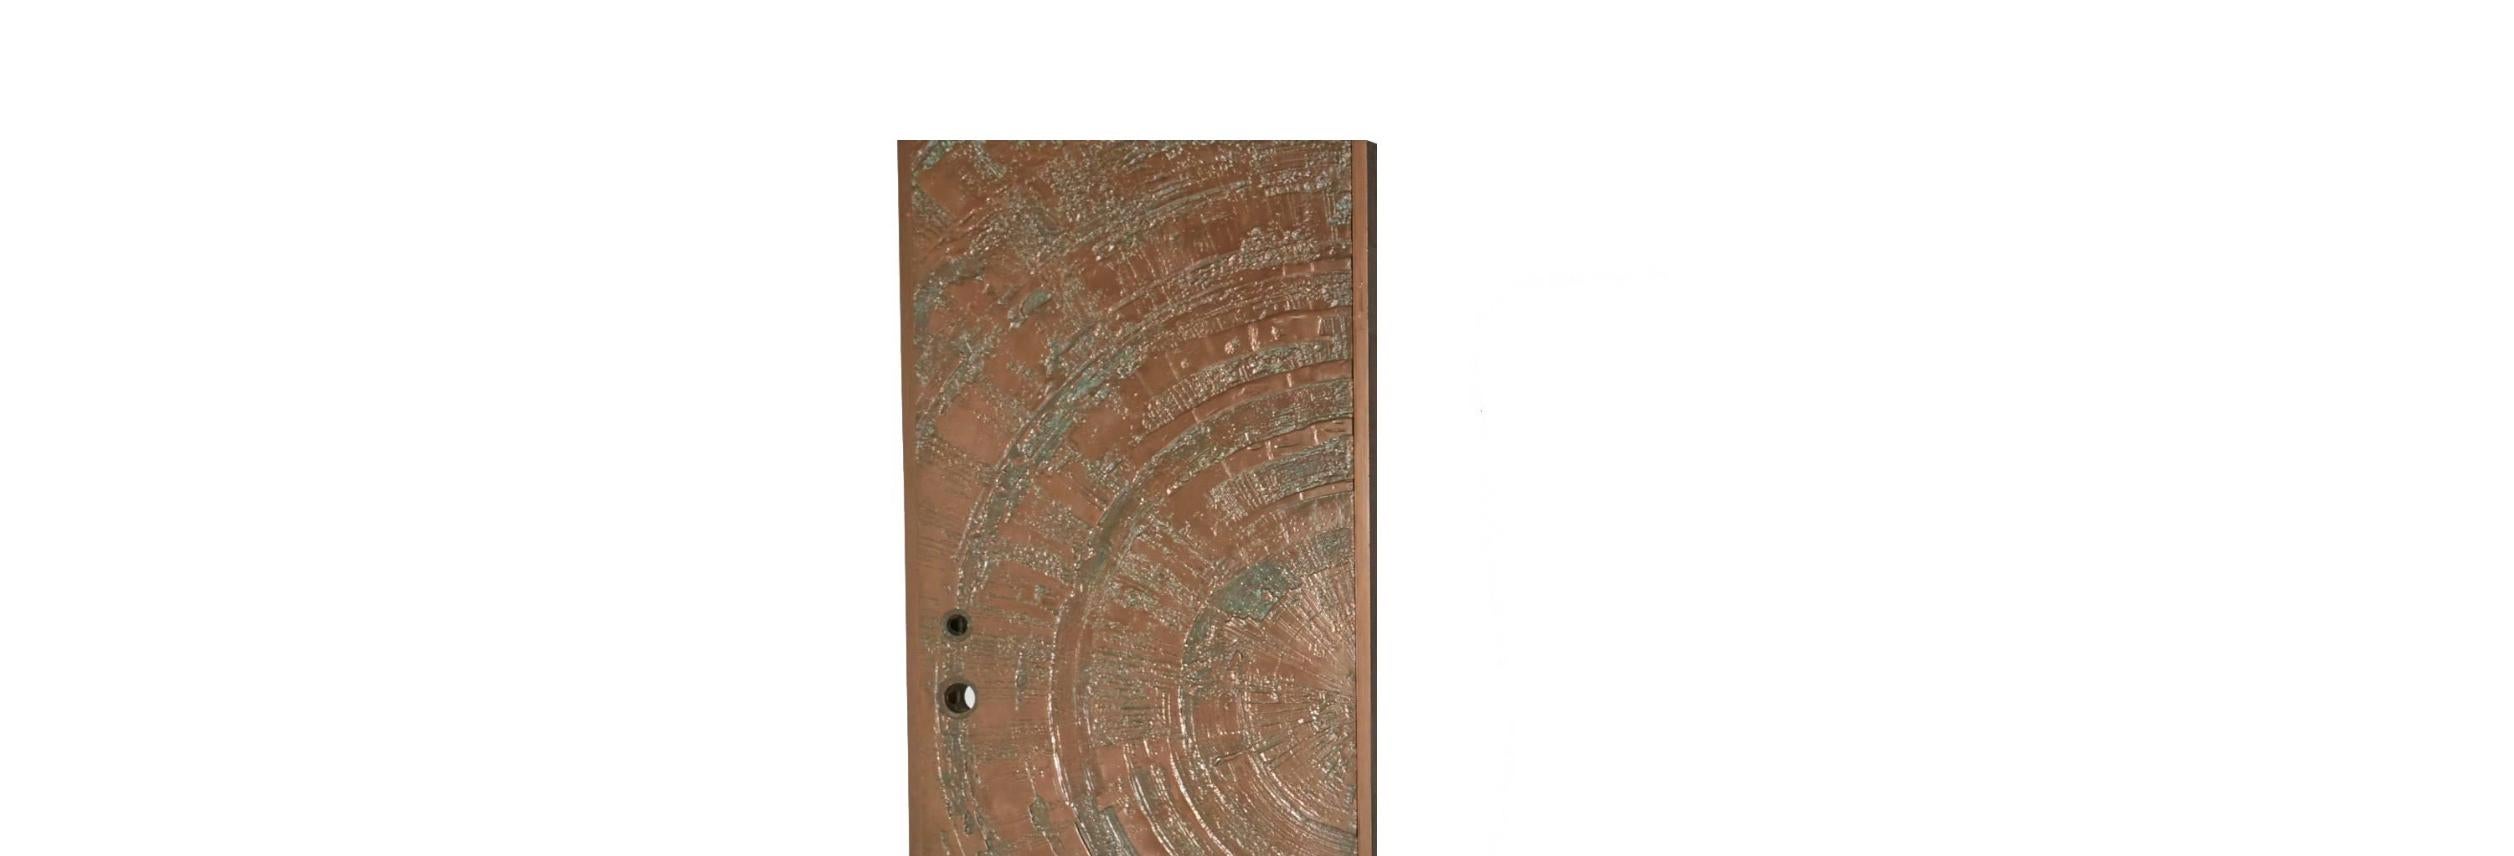 By Forms and Surfaces circa 1960-1970, a textured, bonded and poured bronze door in an abstract Sunburst design. An absolutely stunning and eye-catching door, this item comes from deadstock and has never been used, so it is in excellent condition